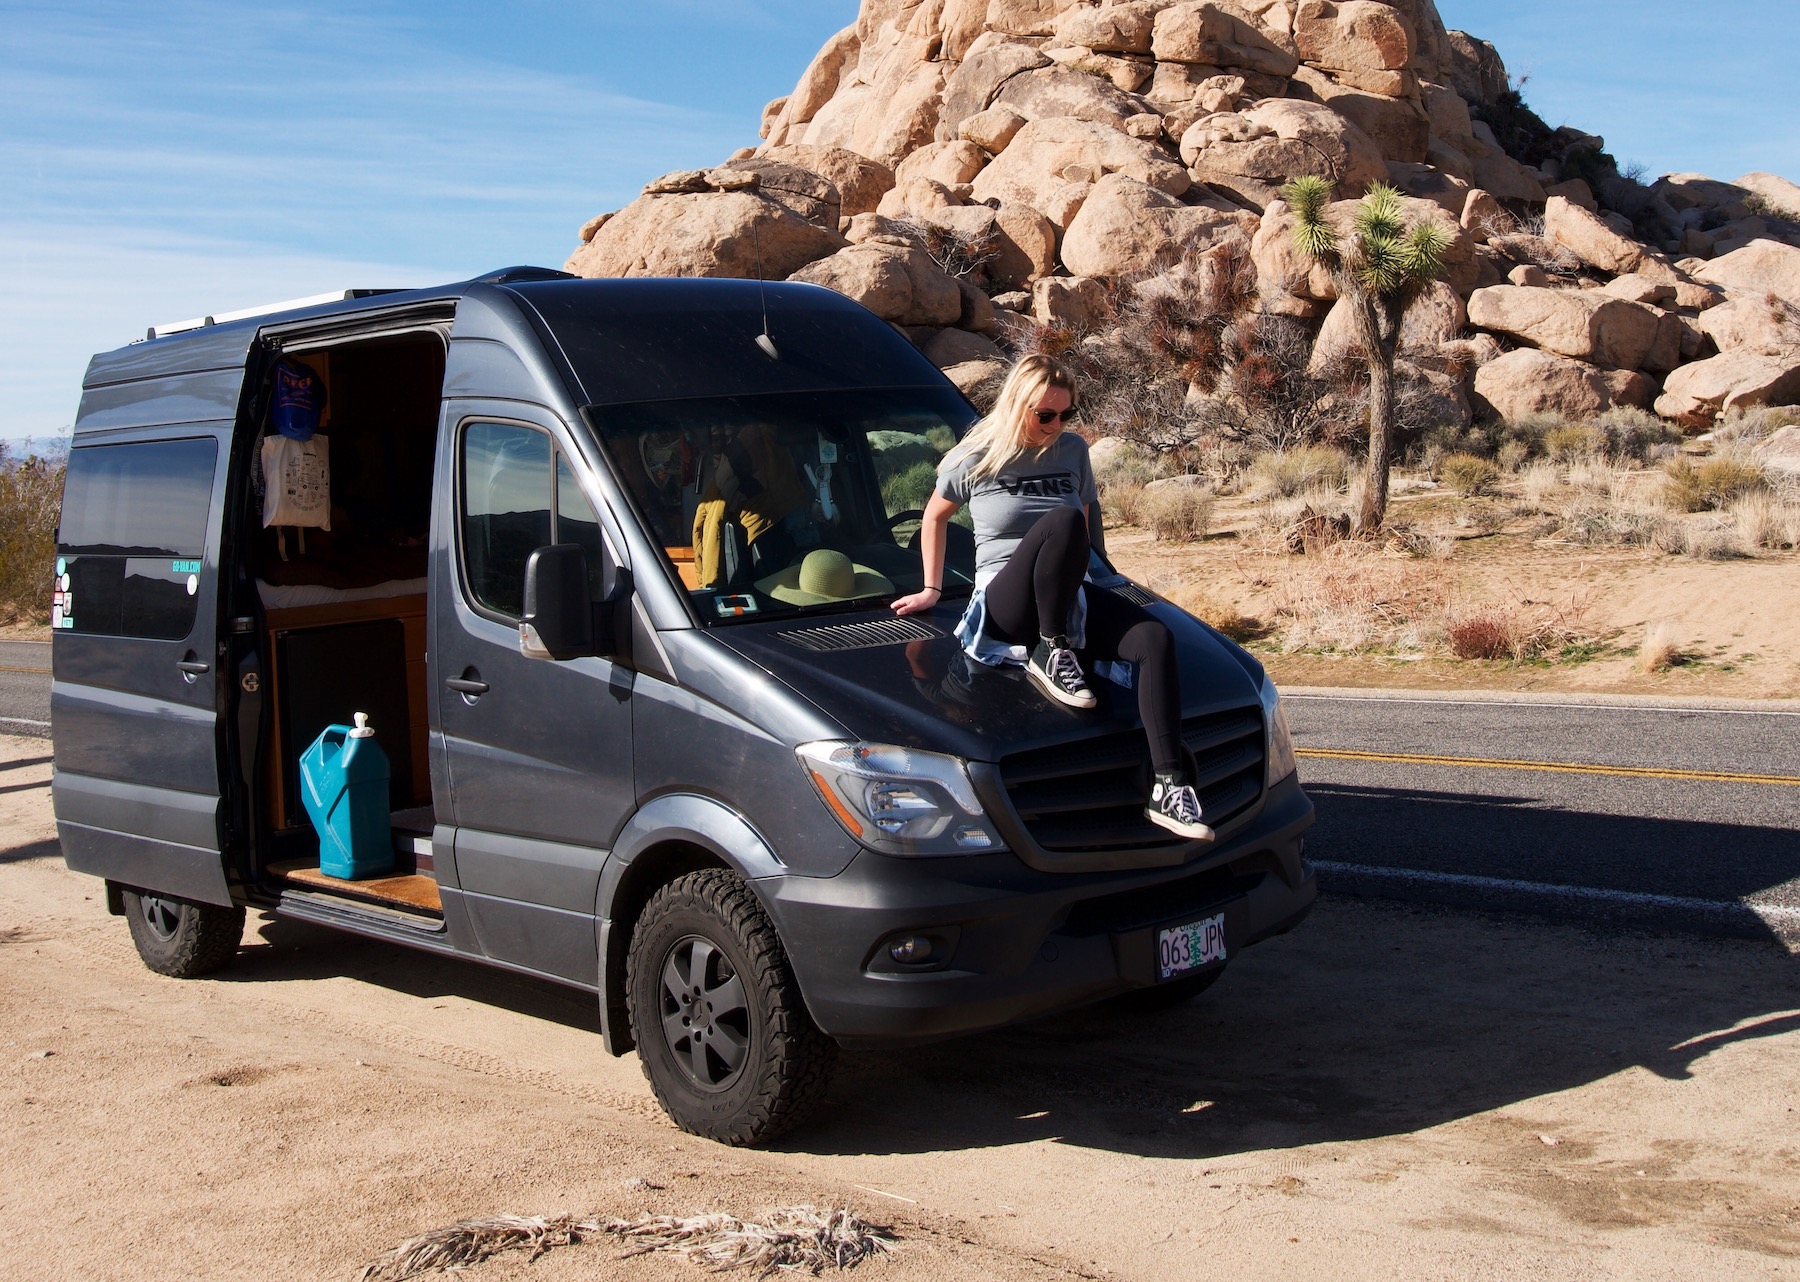 The Vanlifer’s Guide to Joshua Tree National Park